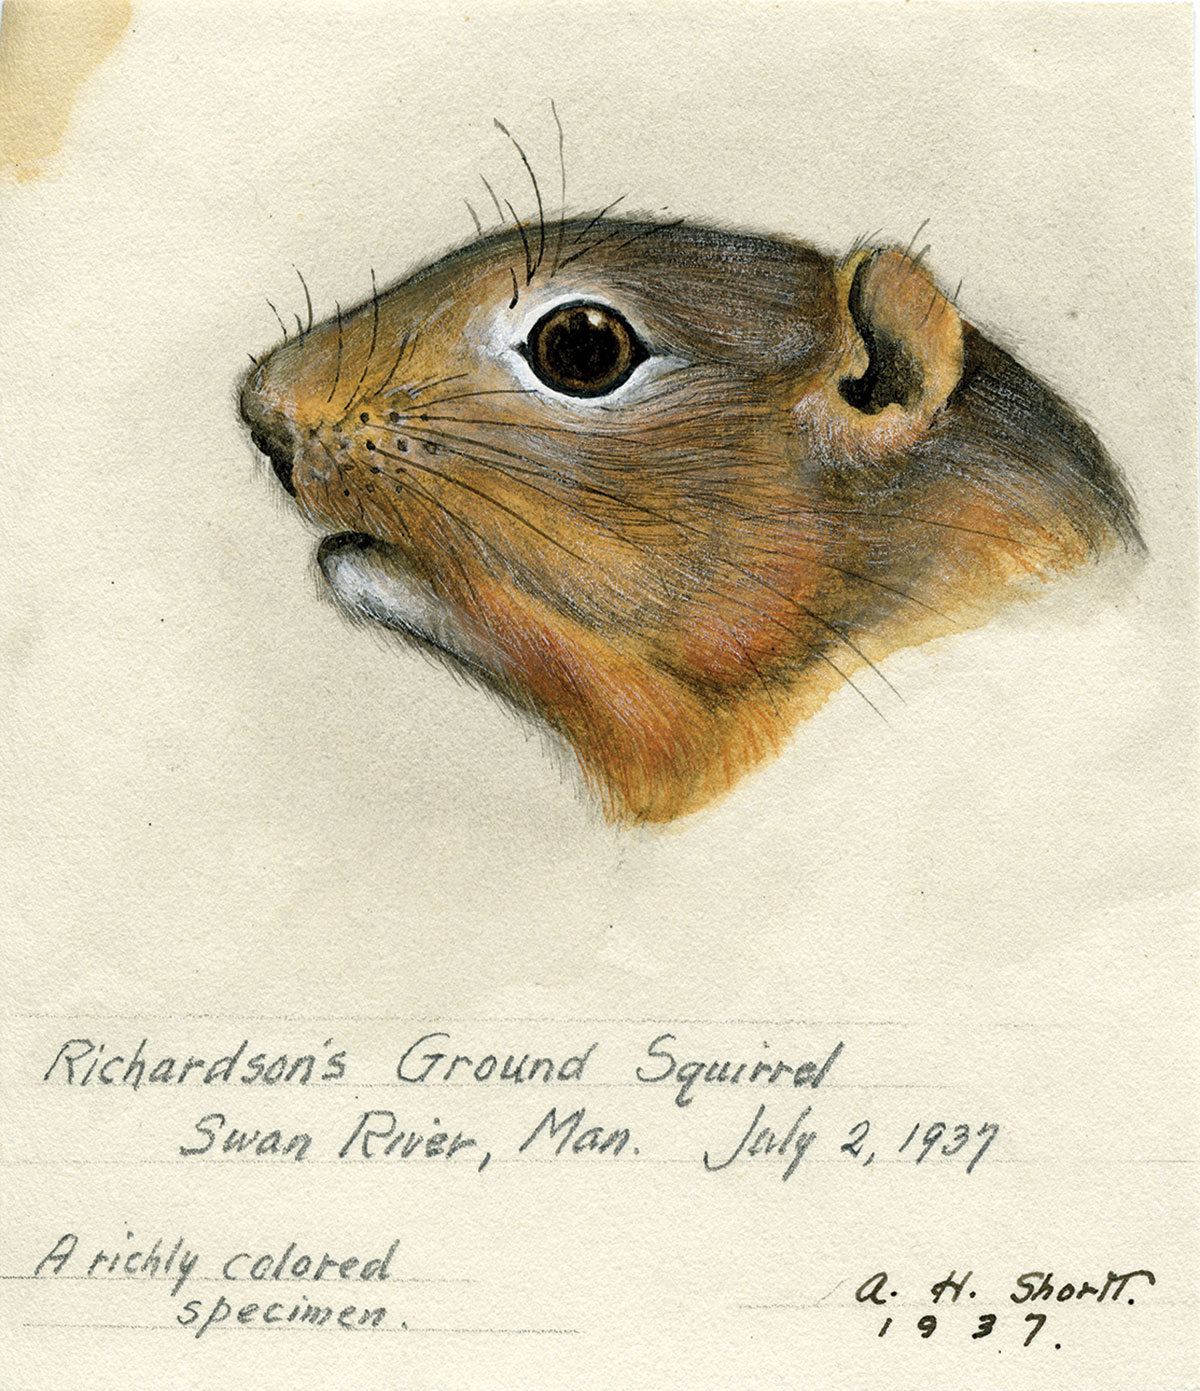 An illustration of a ground squirrel.